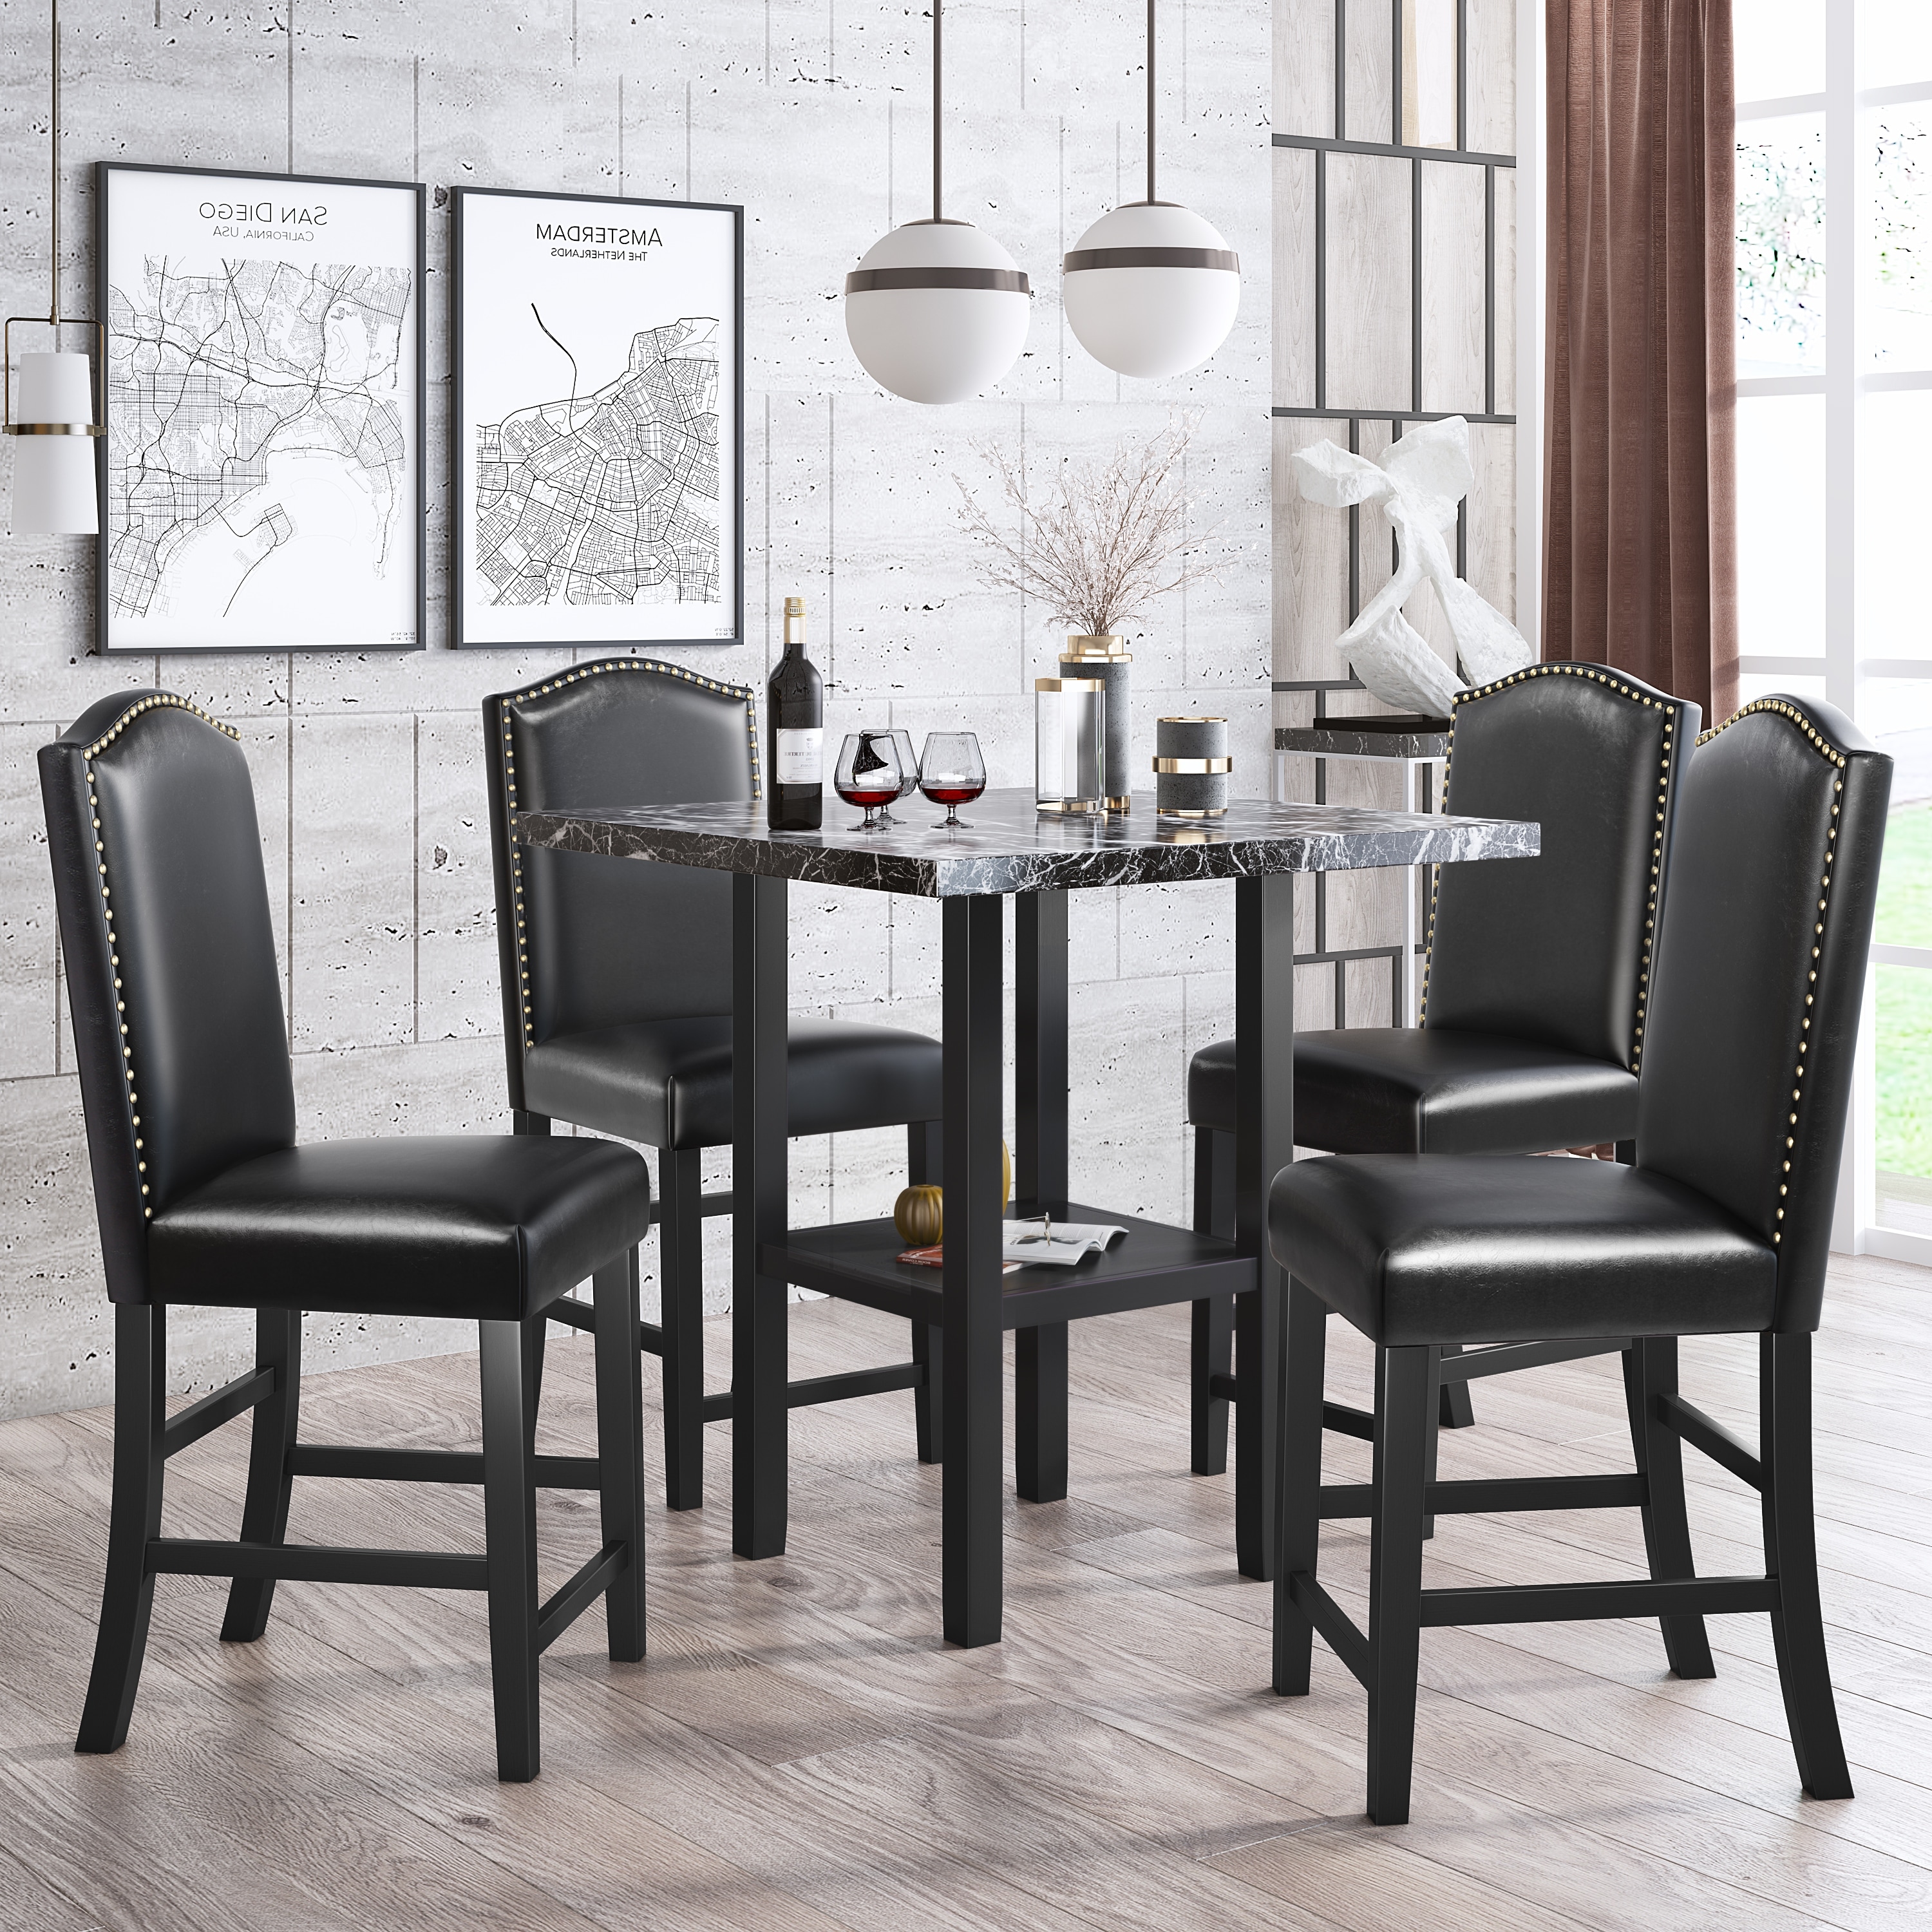 5 Piece Dining Set With Matching Chairs and Bottom Shelf For Dining Room